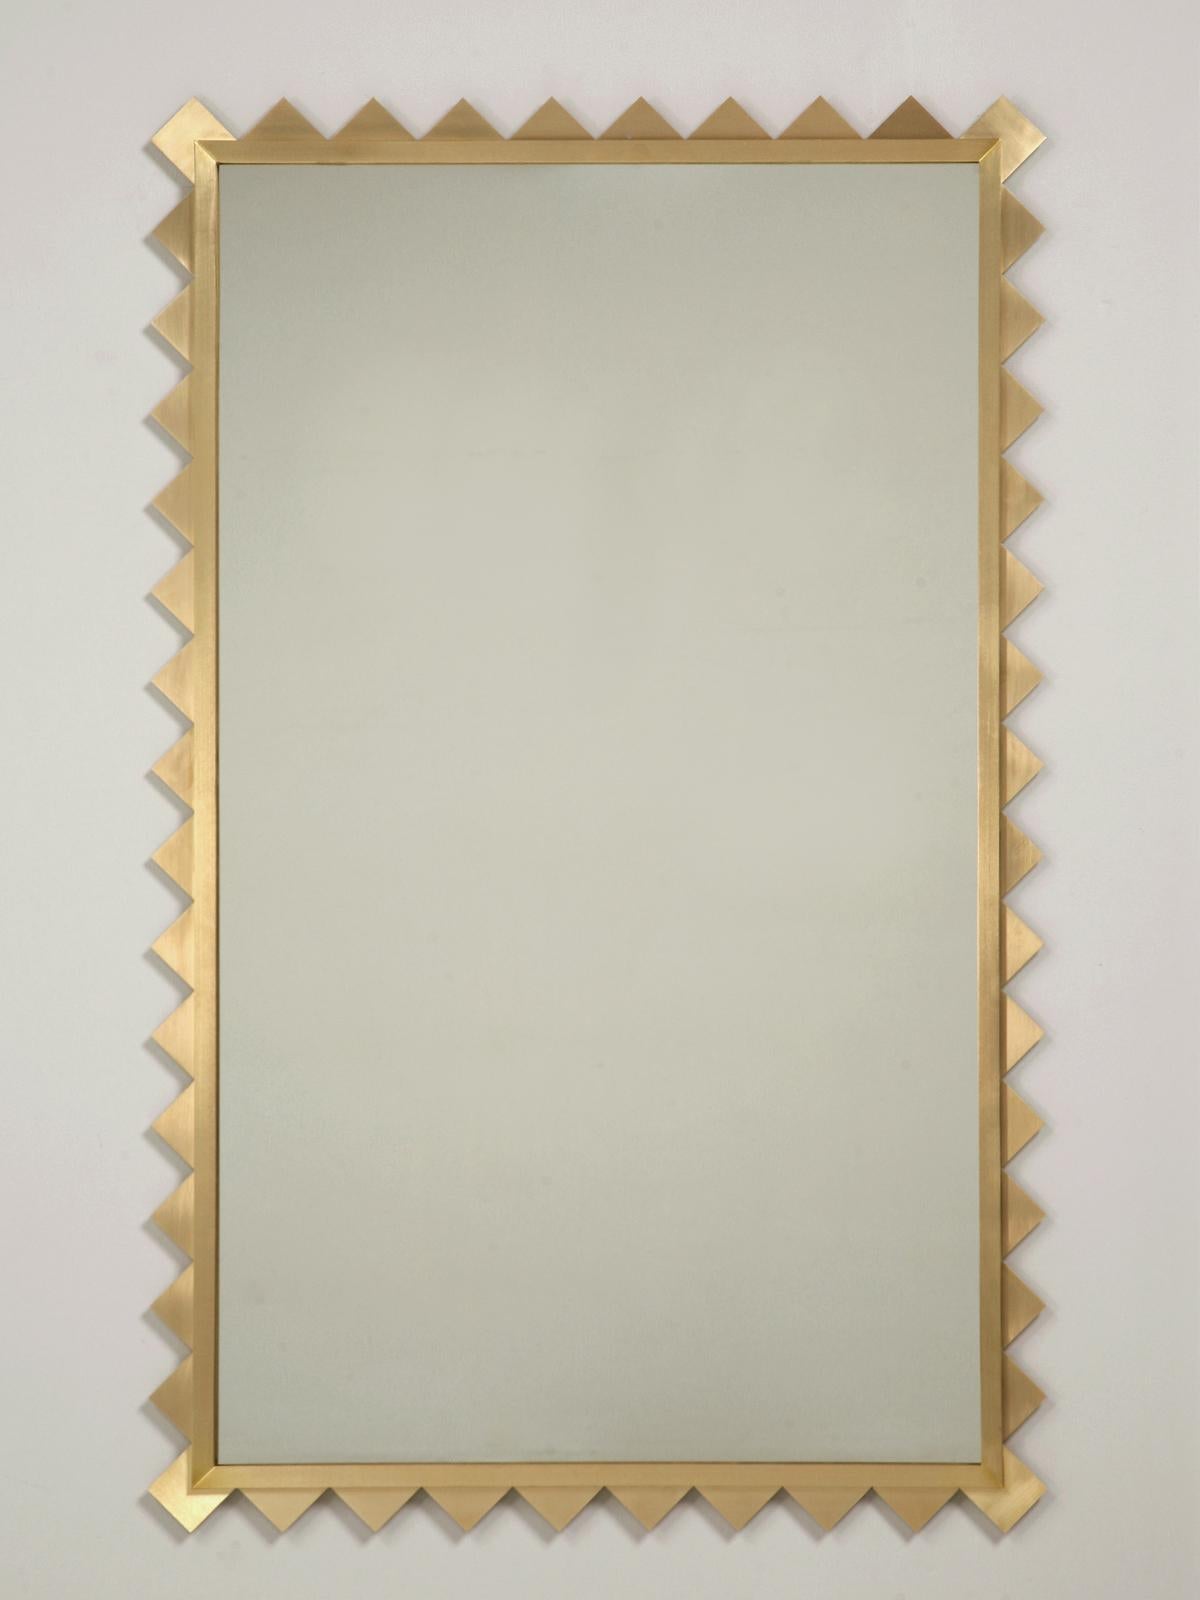 Commonly referred to as a Shark Tooth Mirror and since they are never in the exact size you require, we decided to fabricate them in house and can now offer the Shark Tooth Mirrors in any size you desire. Please note; they will vary a smidge because